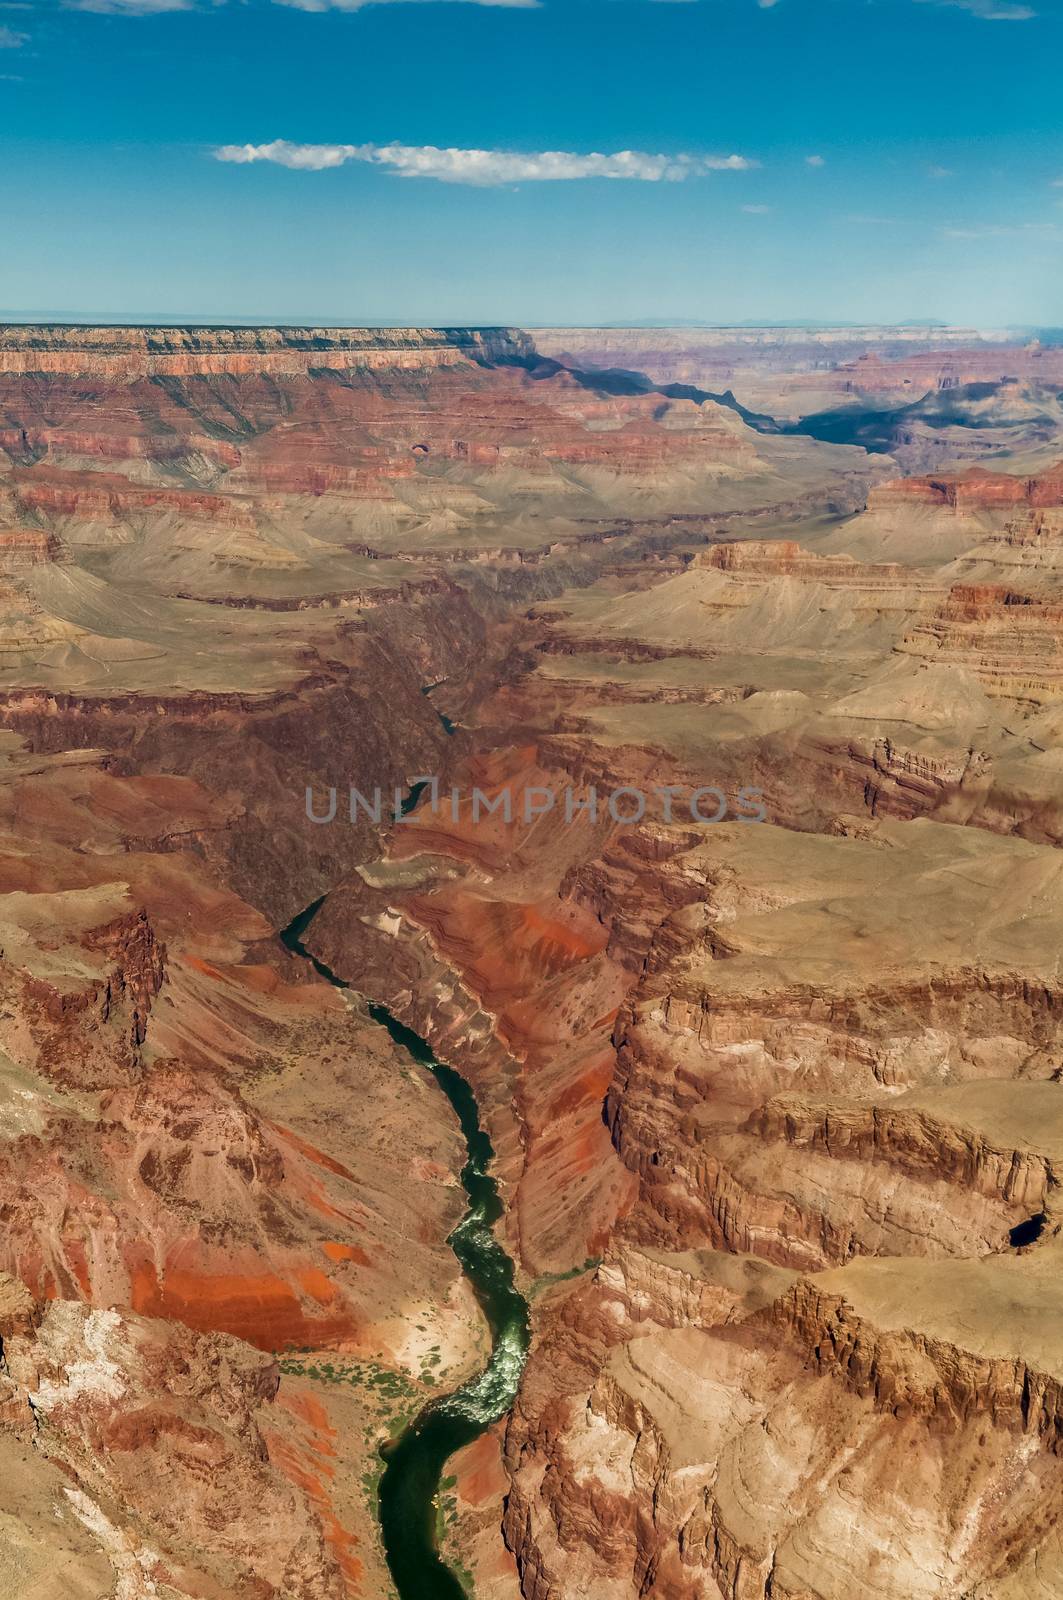 Aerial view of Grand Canyon, shot from an airplane